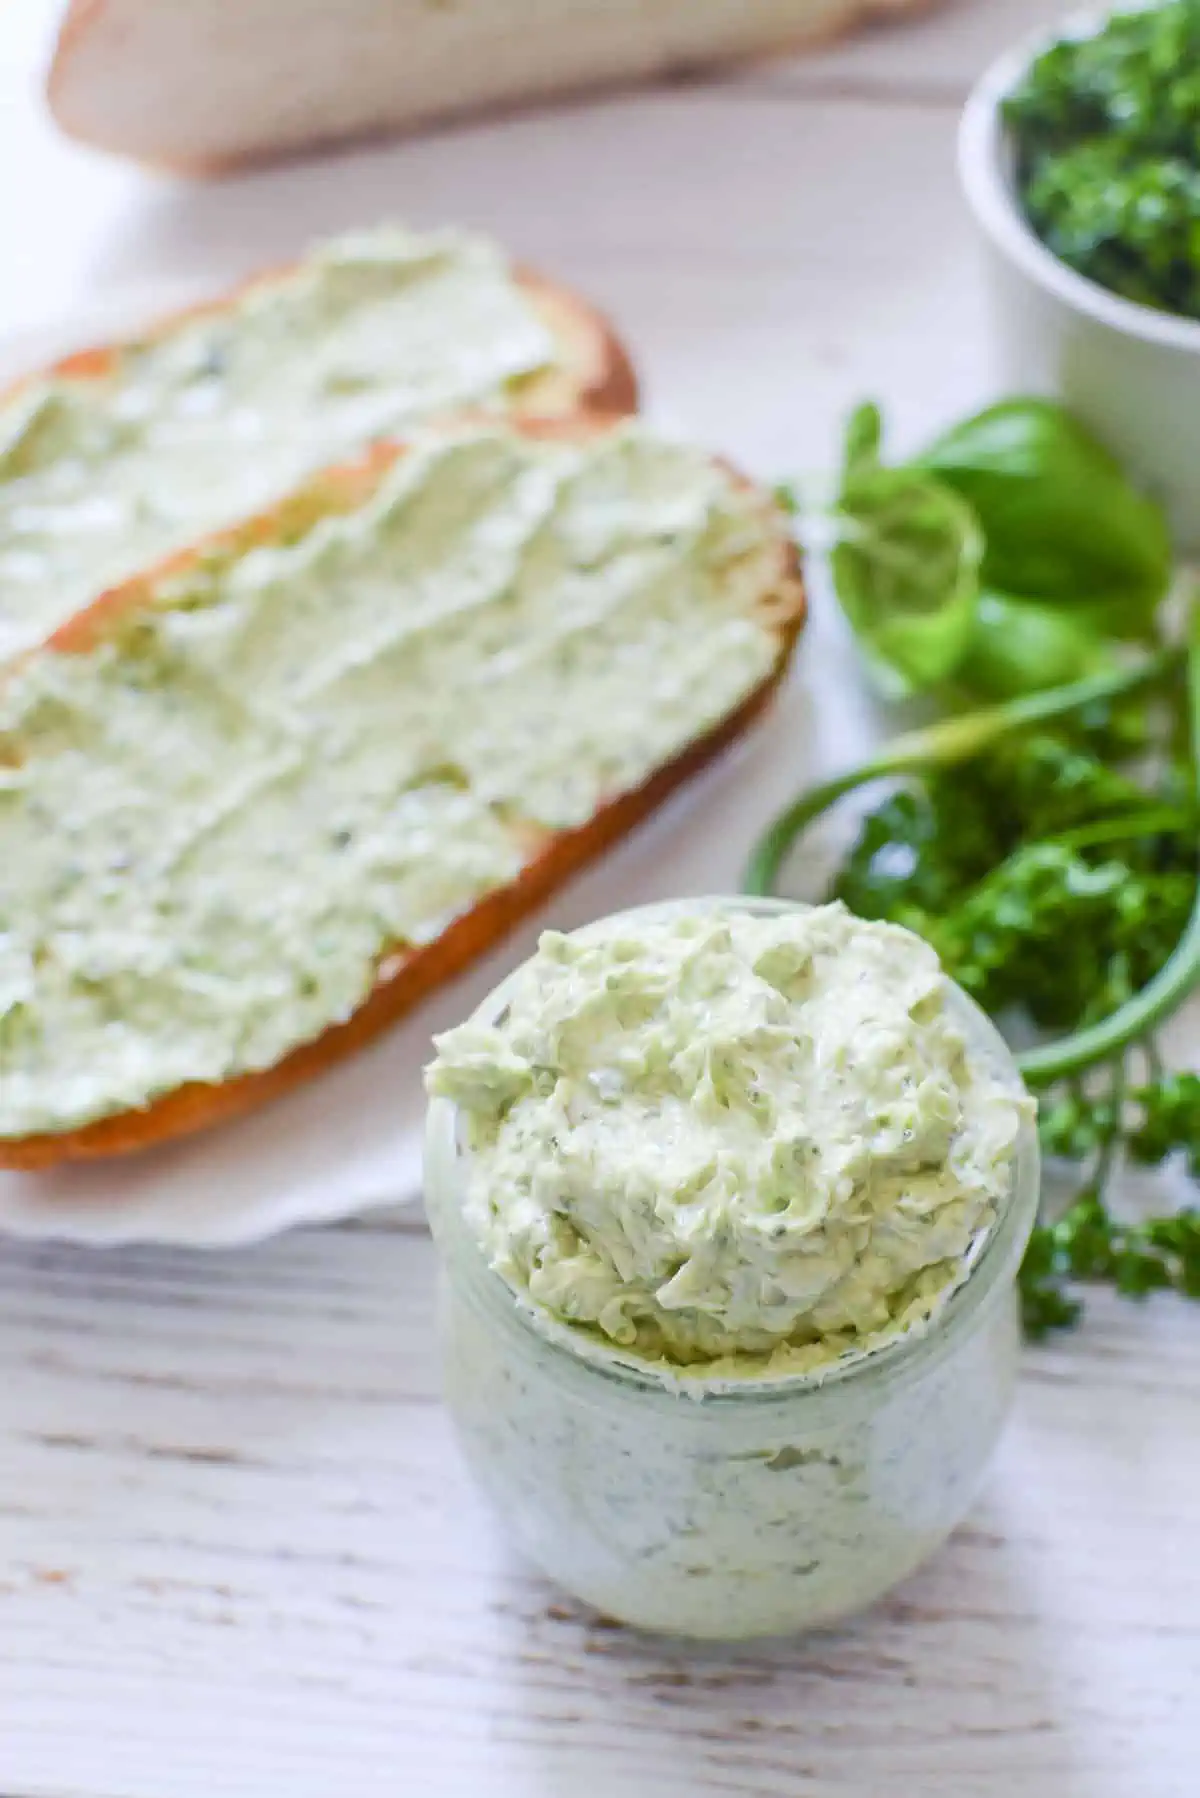 Garlic butter in a glass container with buttered toast in the background on the left.